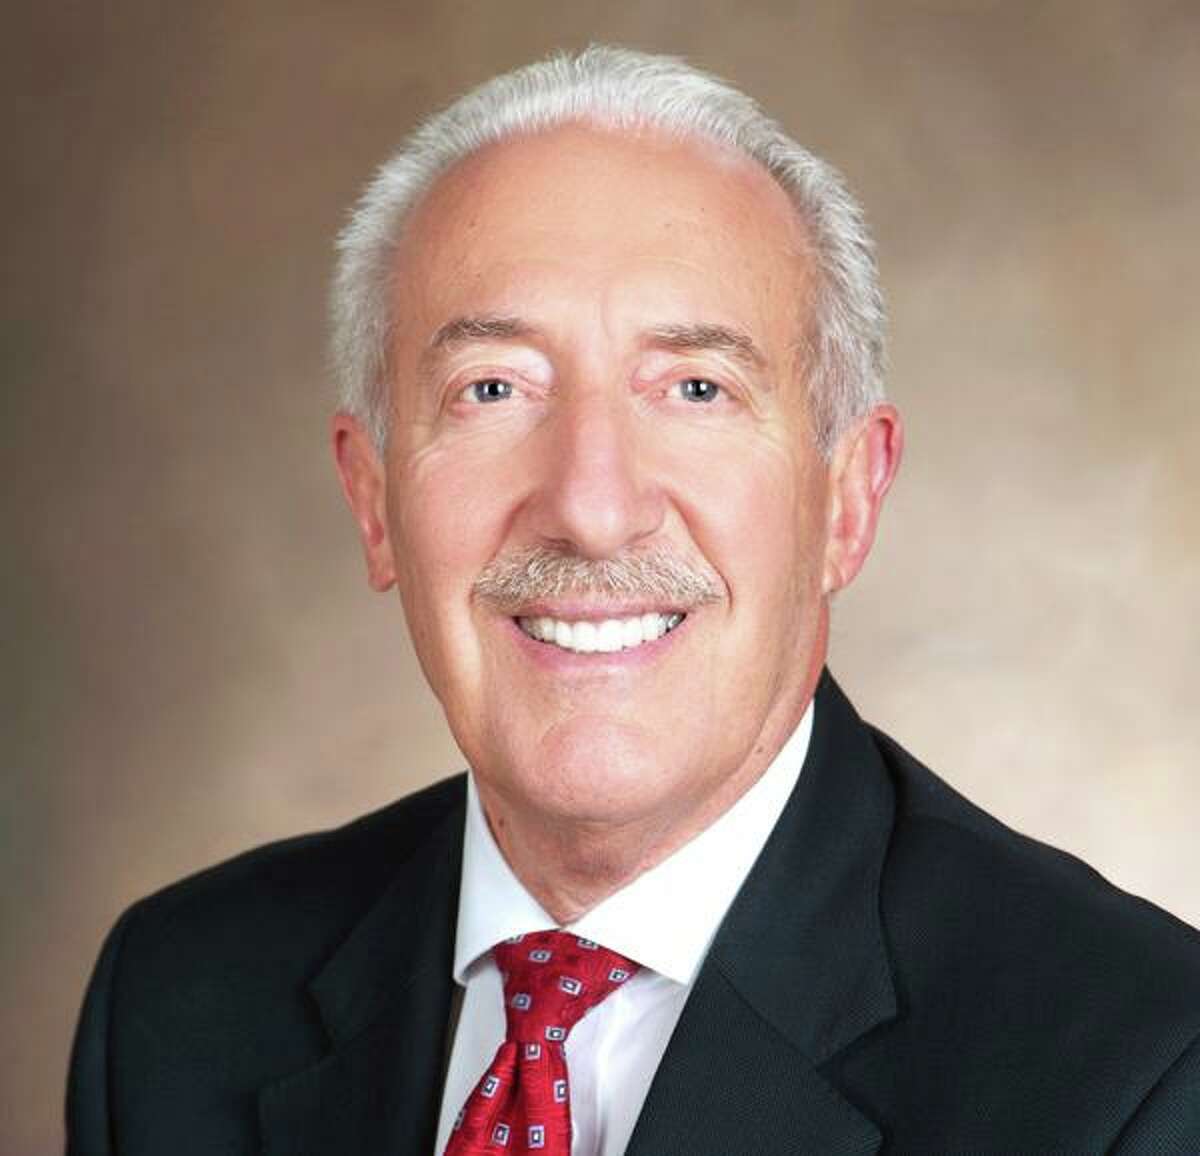 Joseph D. Marino, judge of probate for the District of Middletown, is seeking re-election for a 10th term in November.